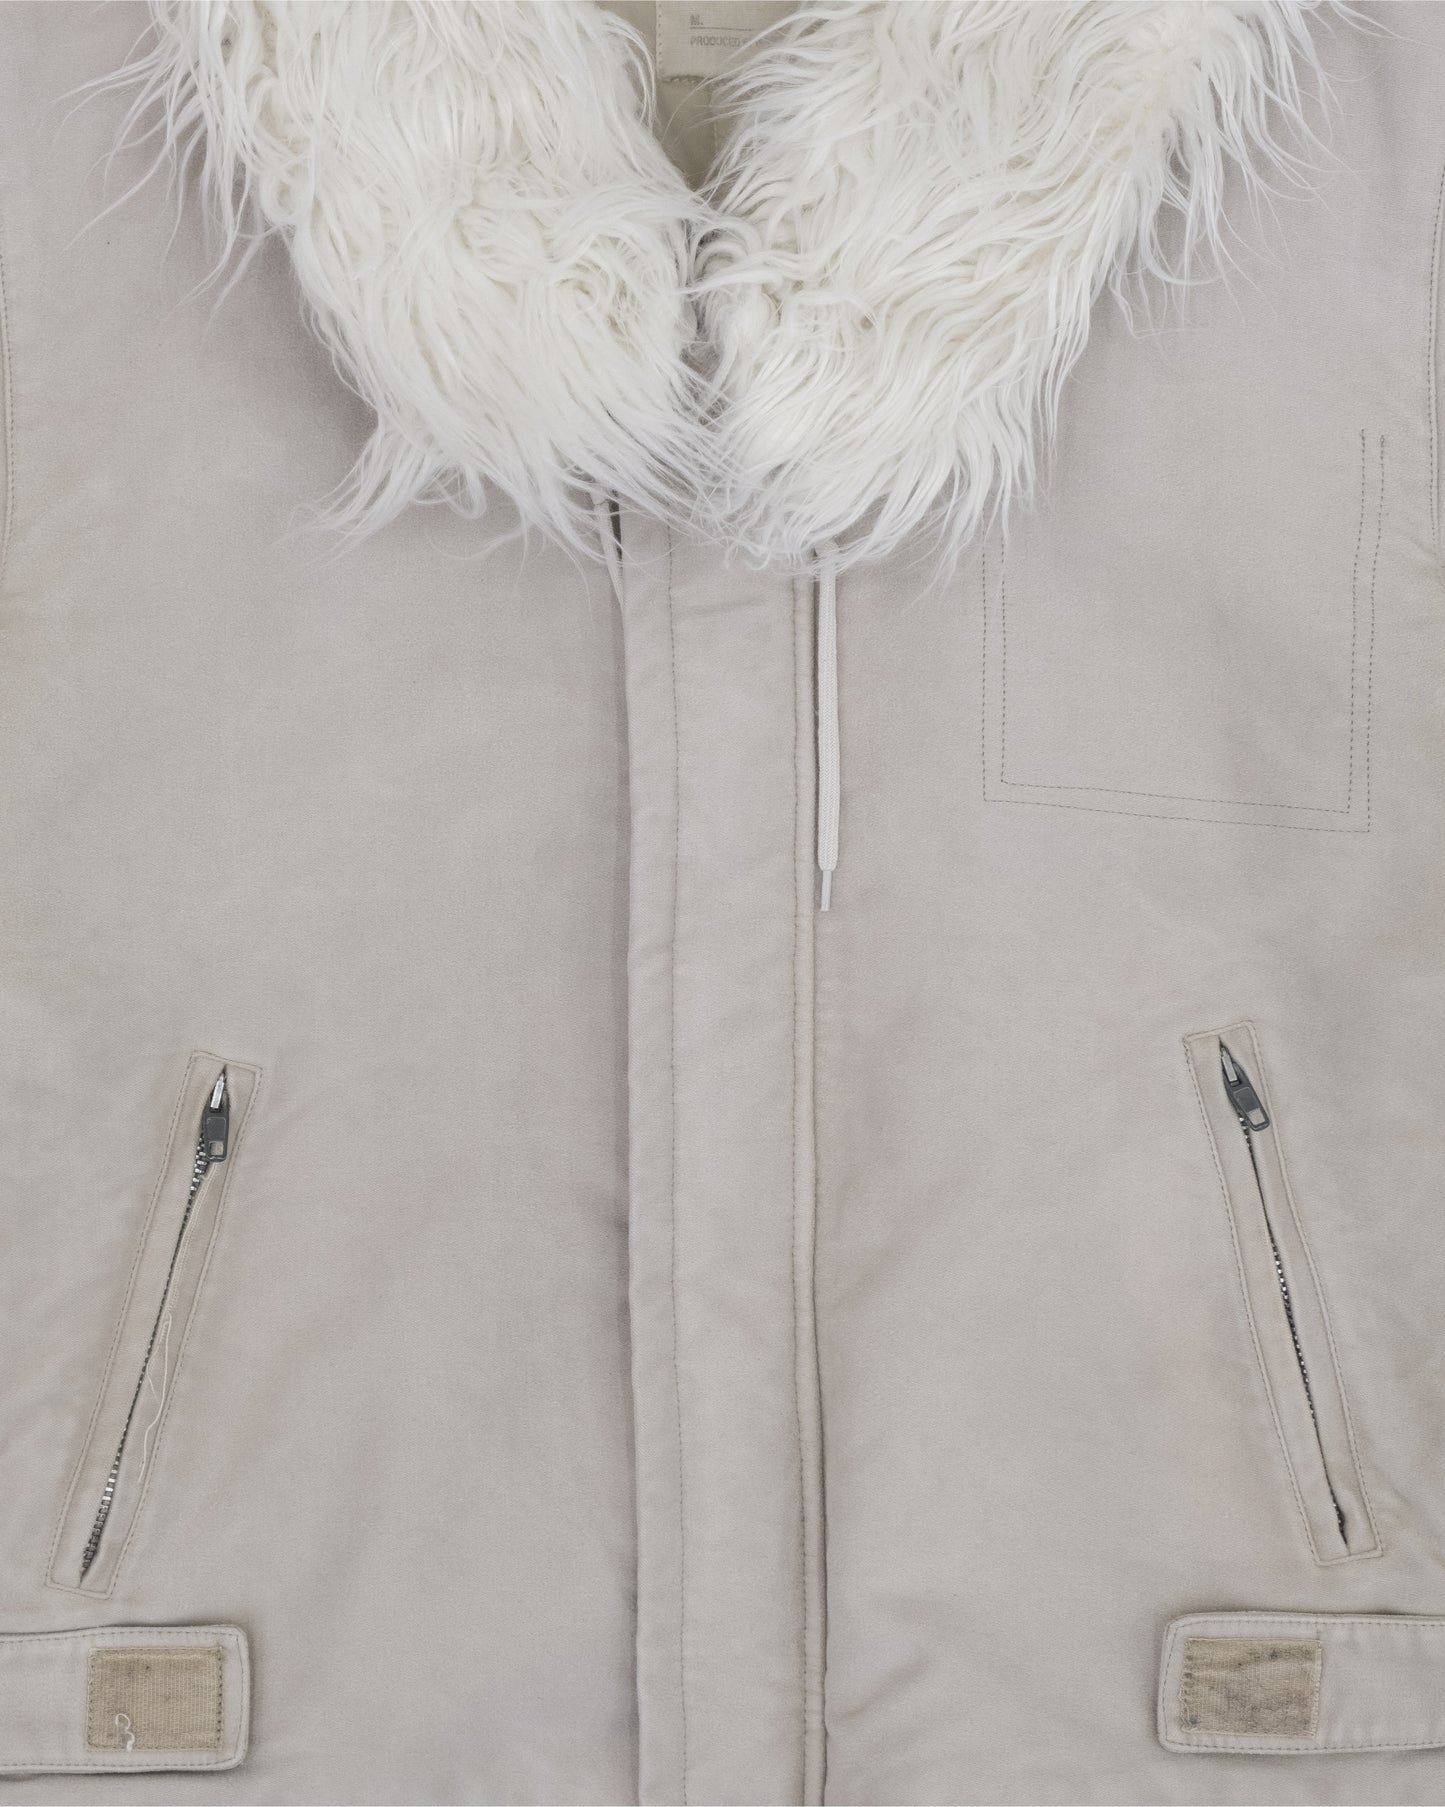 Helmut Lang AW99 Astro Biker Jacket with Faux Fur Collar